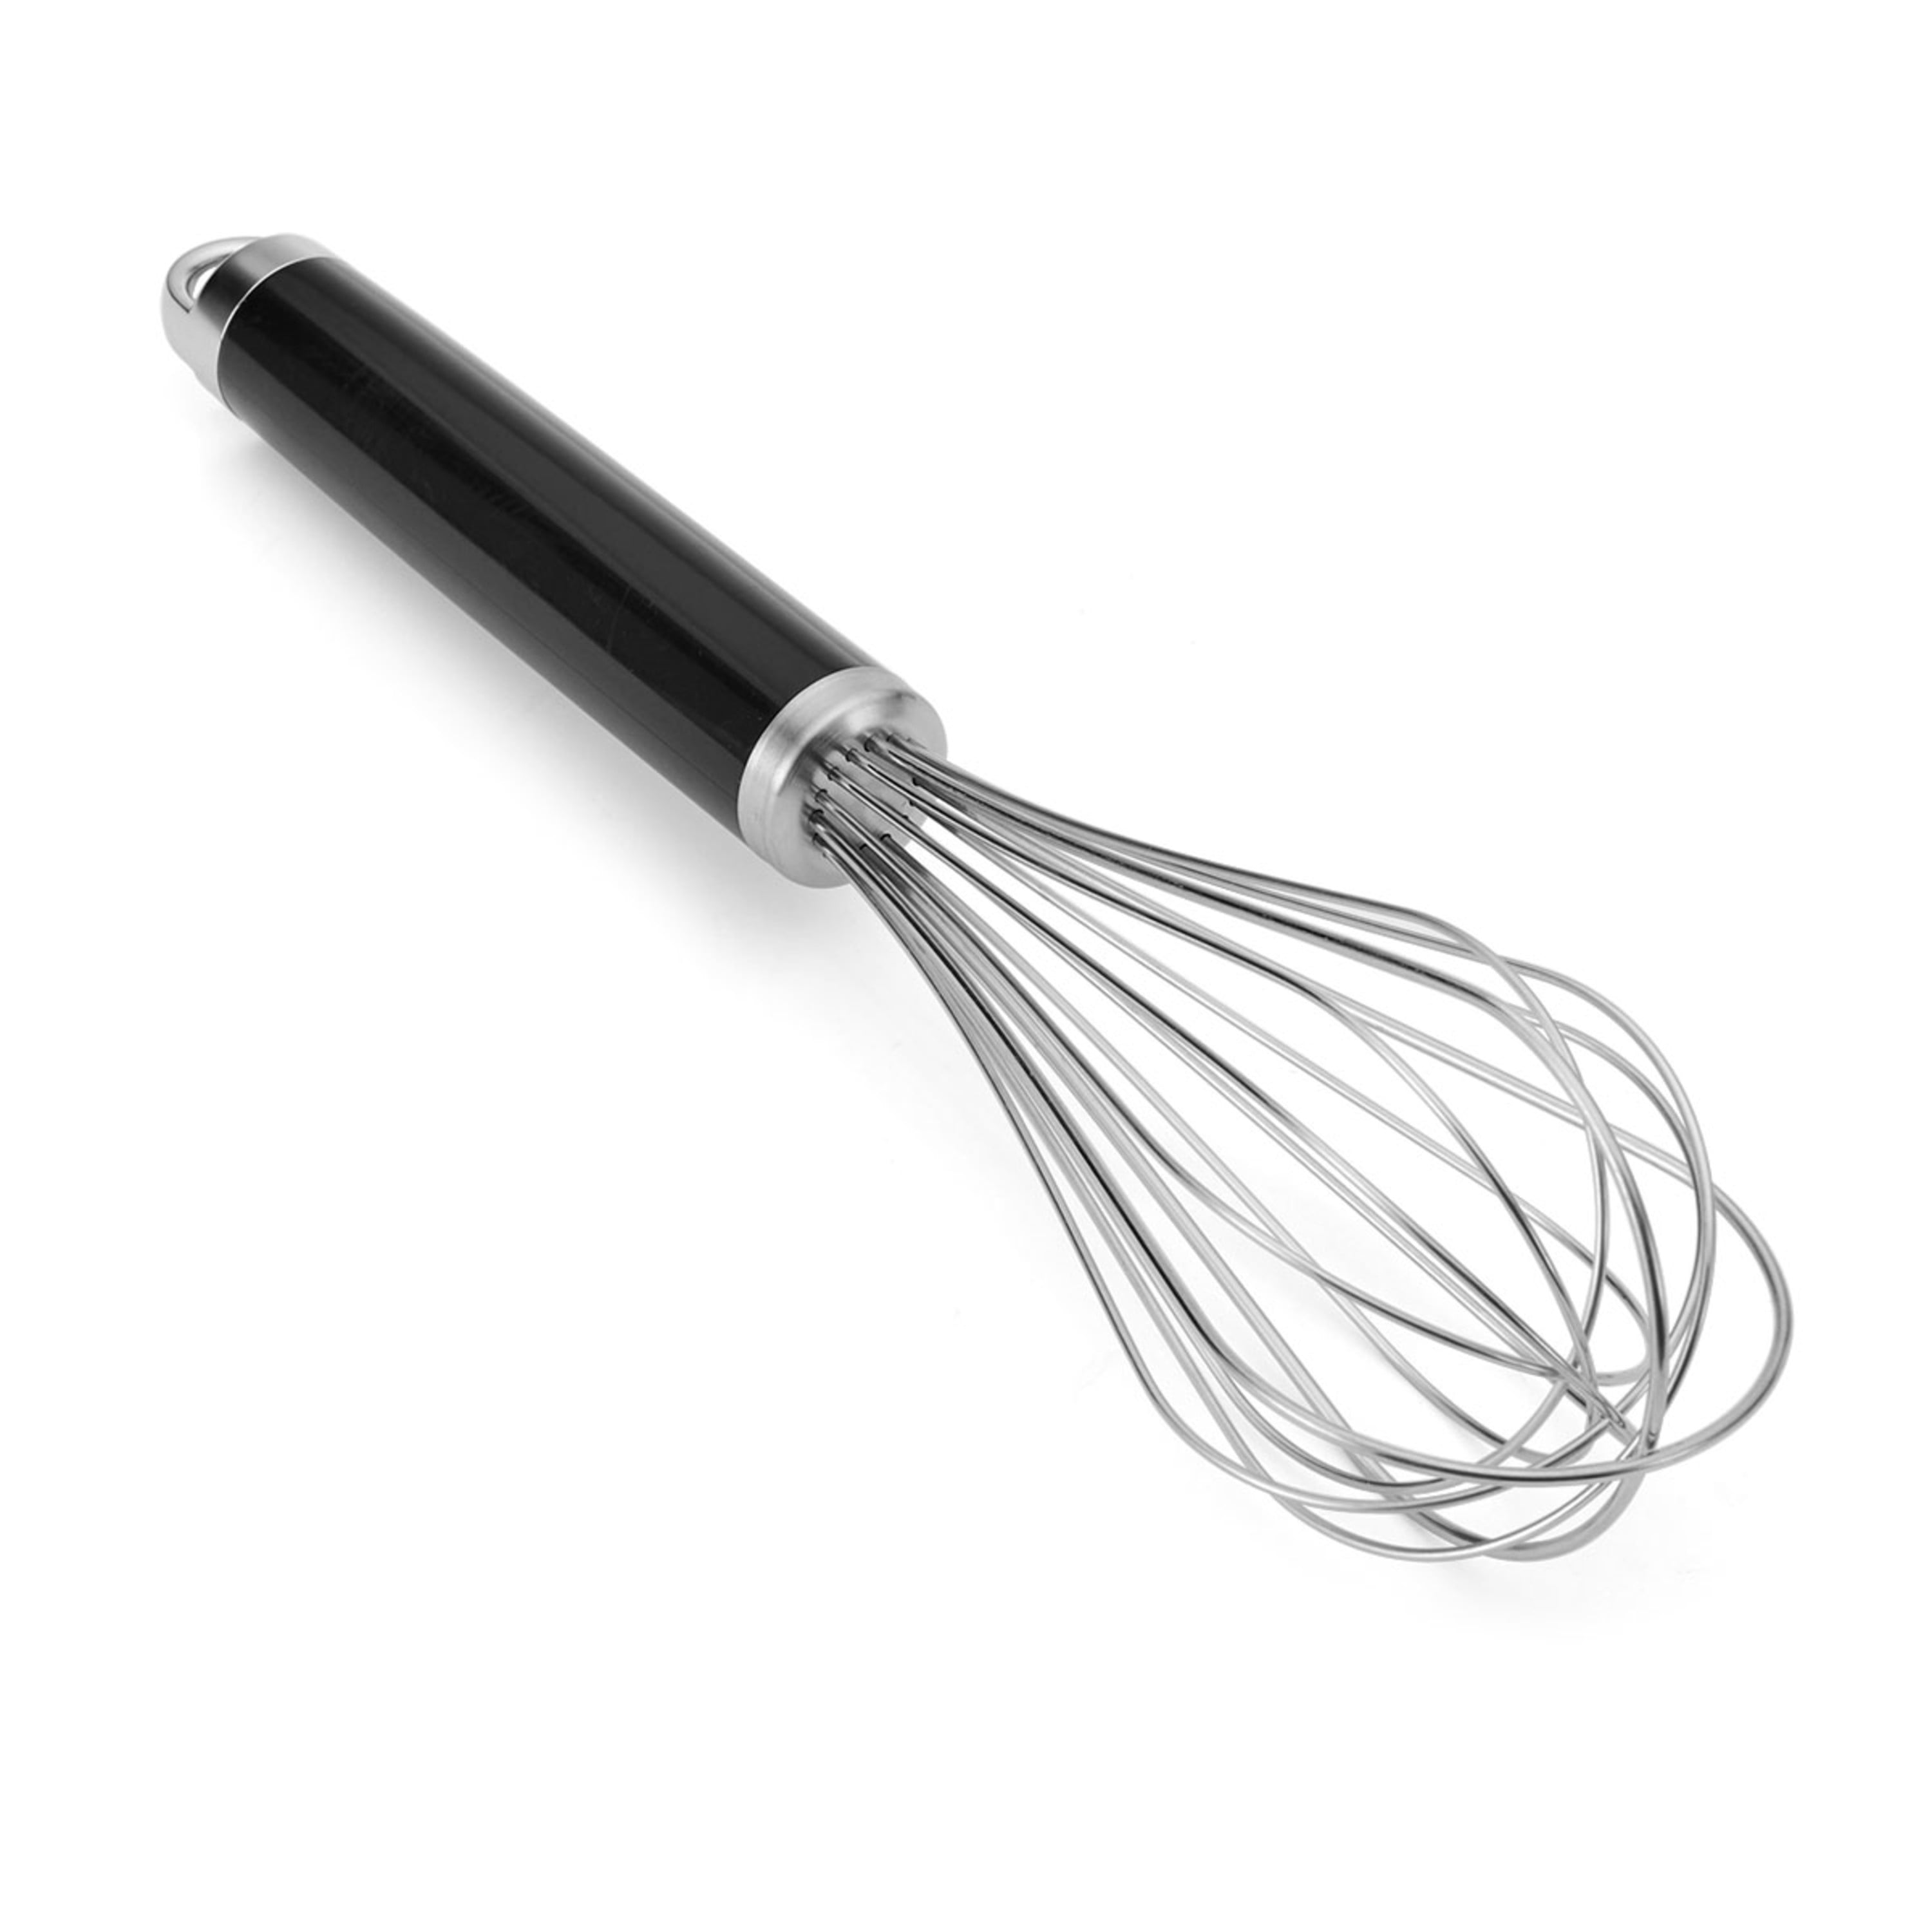 Rada Cutlery Wire Whisk – Stainless Steel Kitchen Whisk with Brushed Aluminum Handle